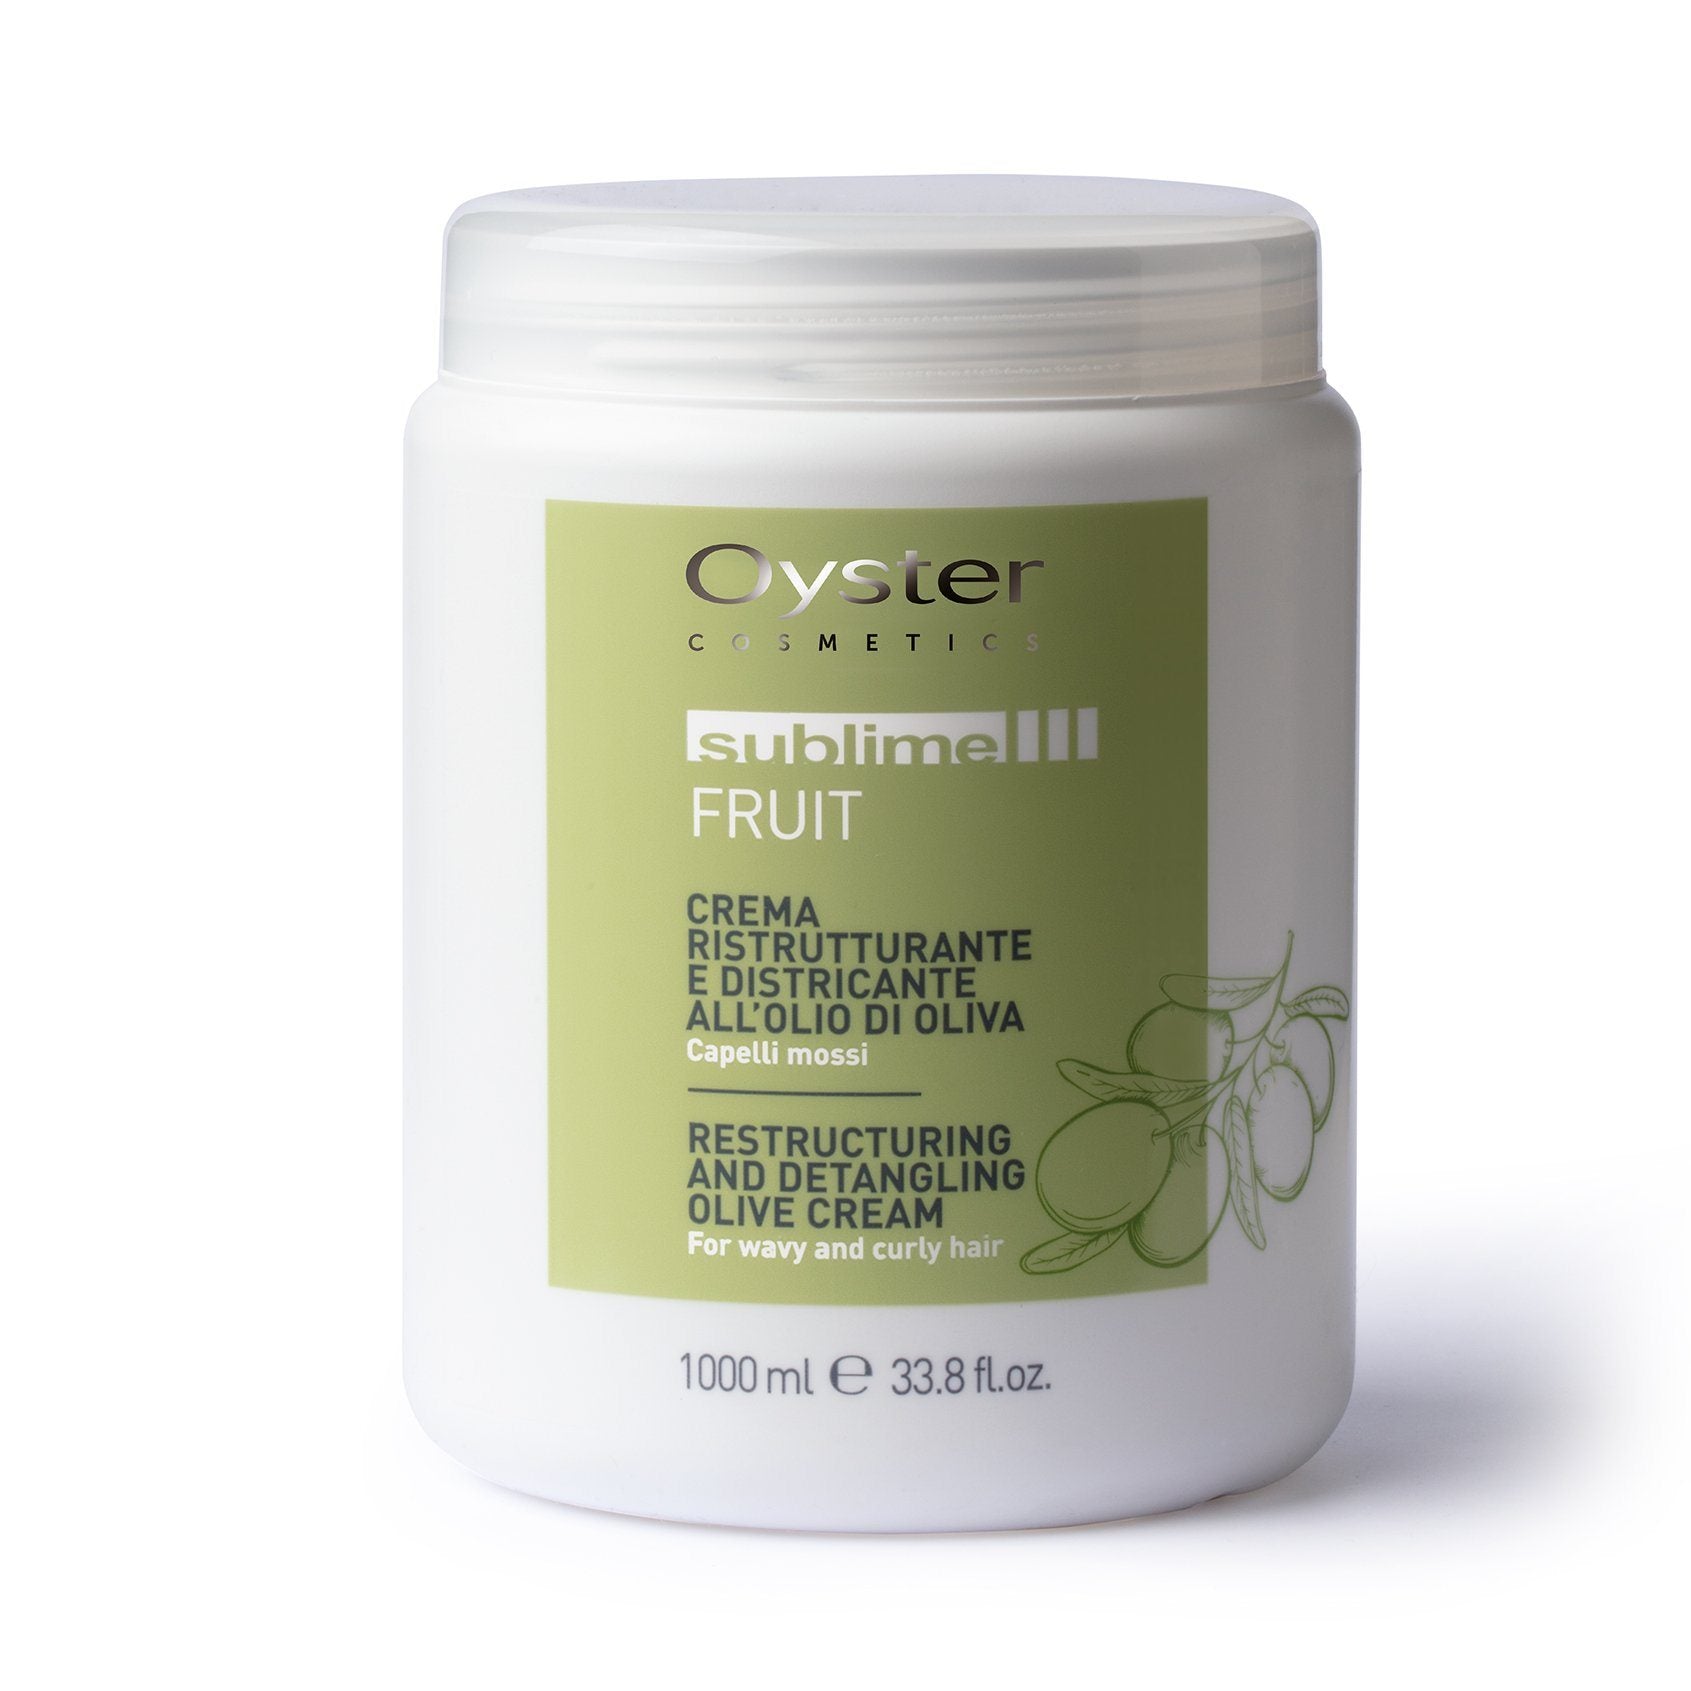 Olive Hair Cream CONDITIONERS OYSTER 